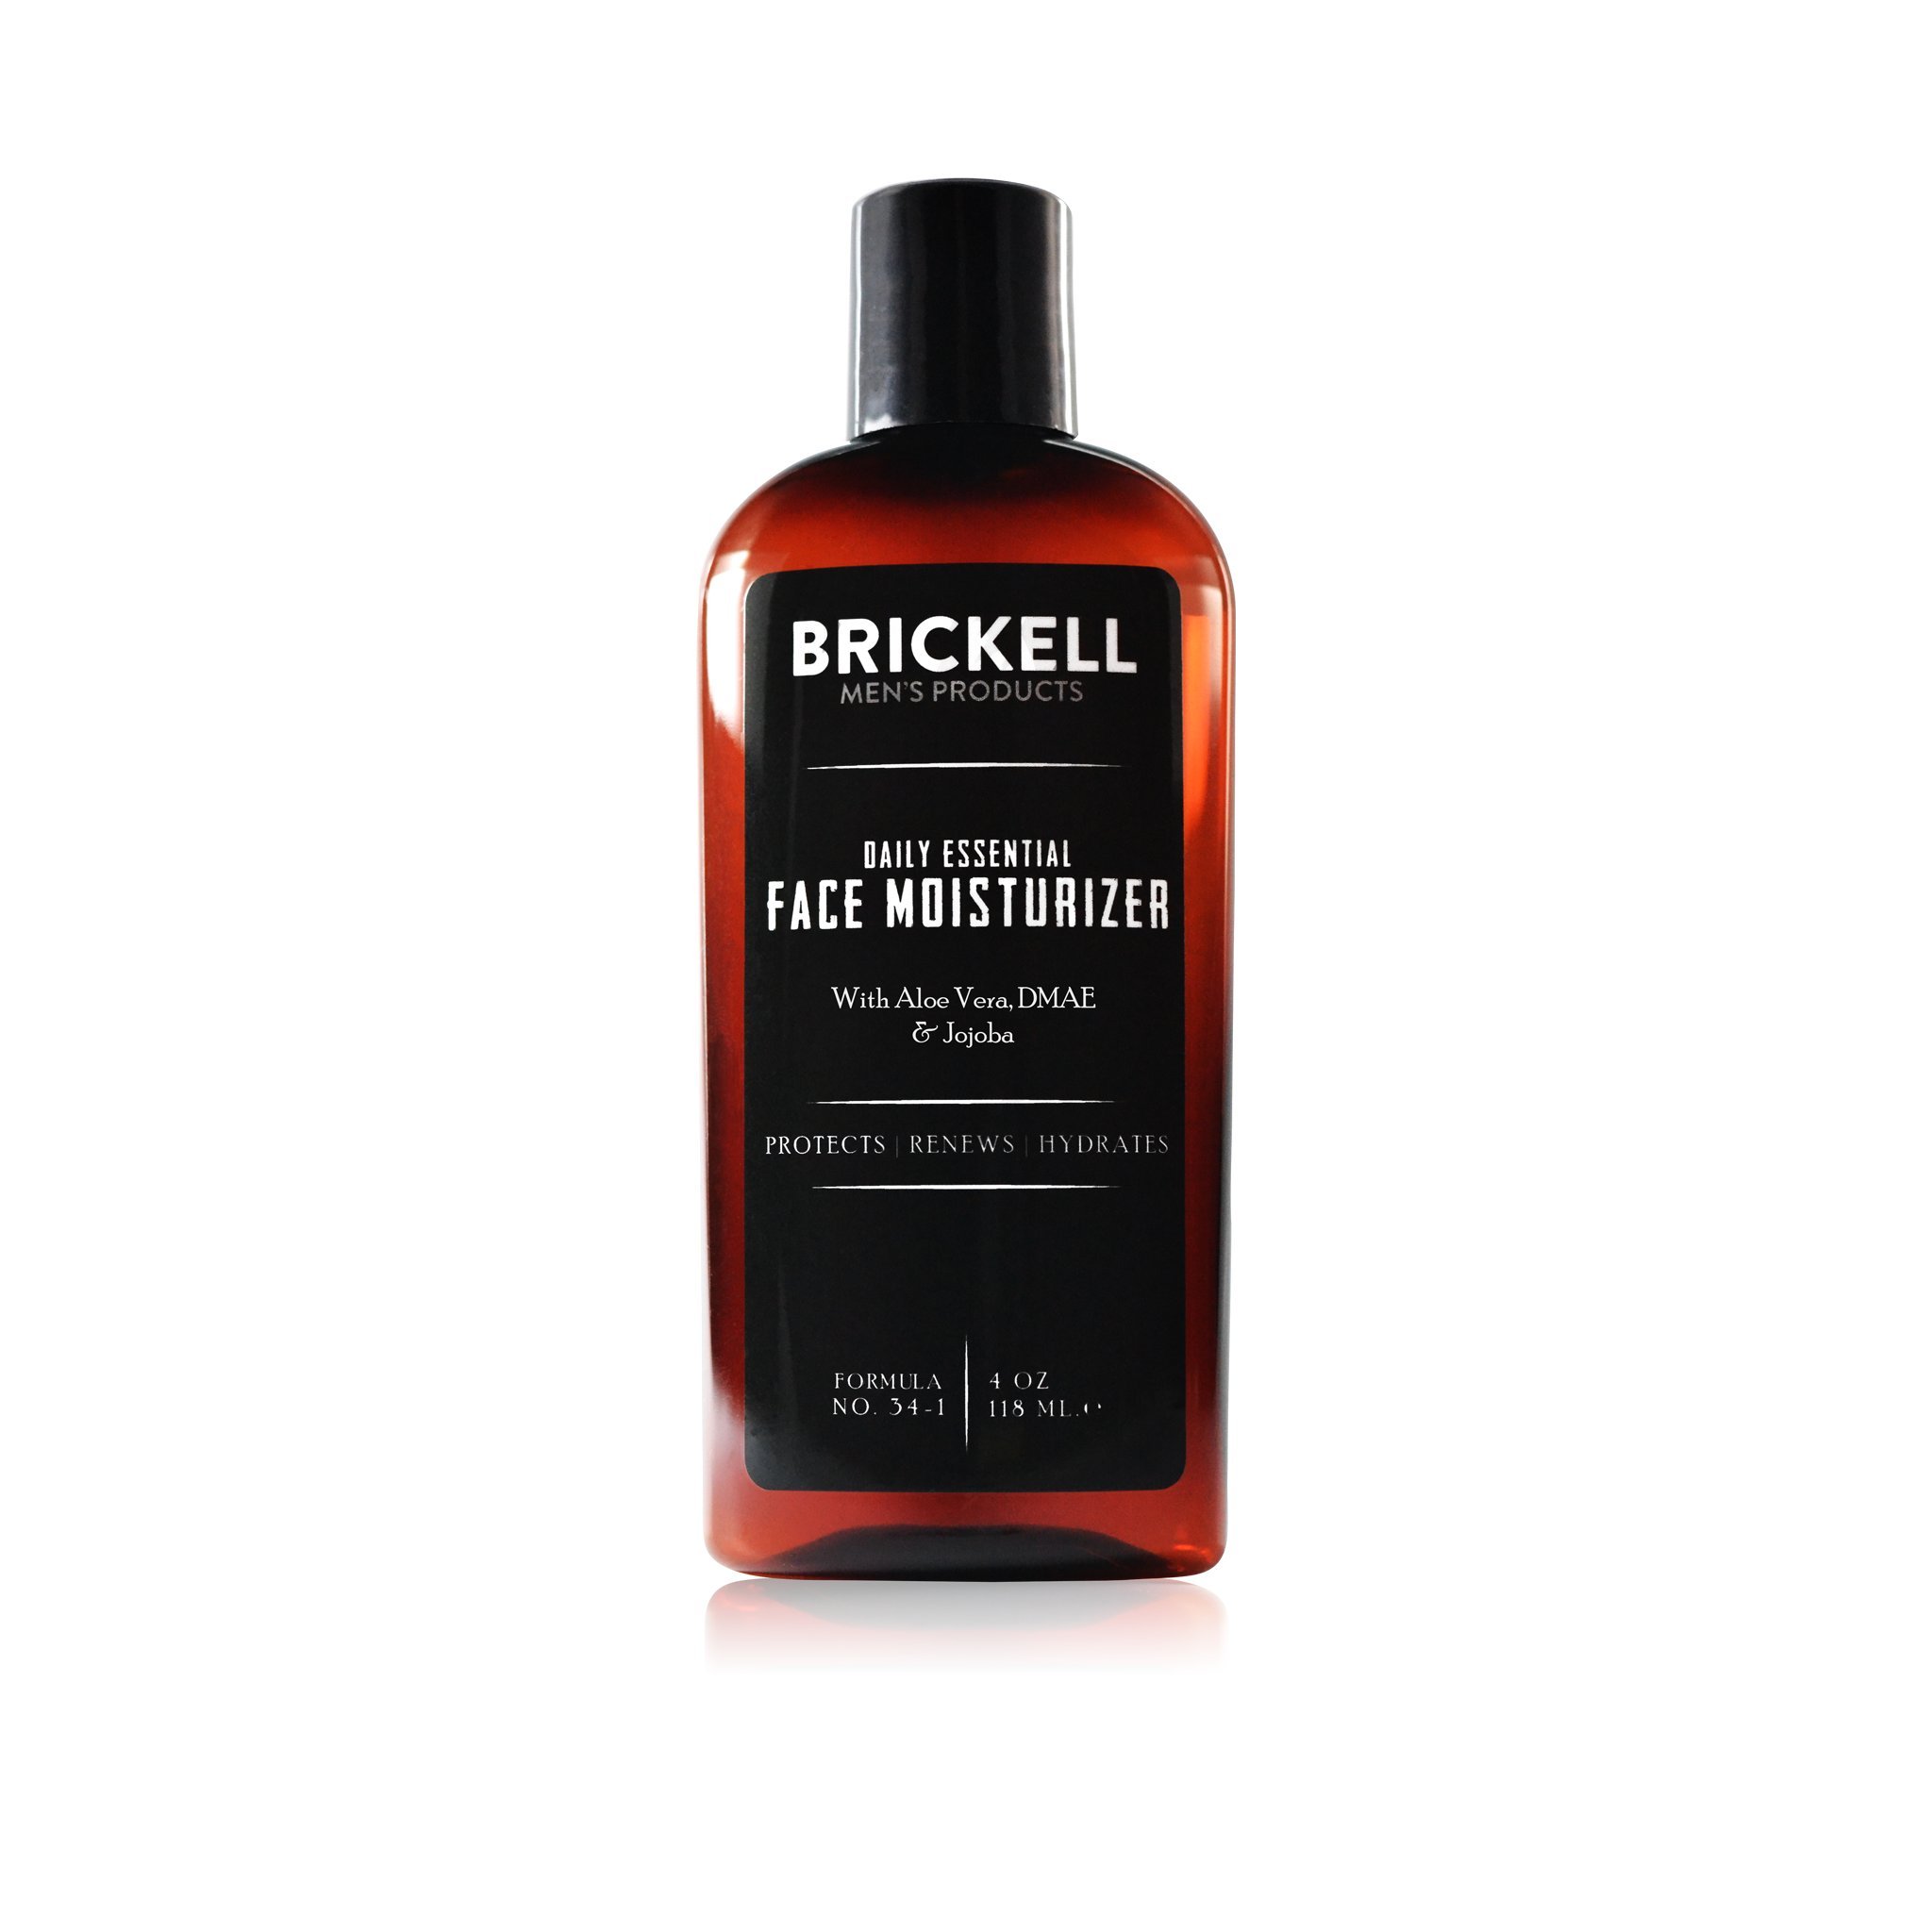 Brickell Mens Produc Brickell Men's Daily Essential Face Moisturizer for Men, Natural and Organic Fast-Absorbing Face Lotion with Hyaluronic Acid, Gr